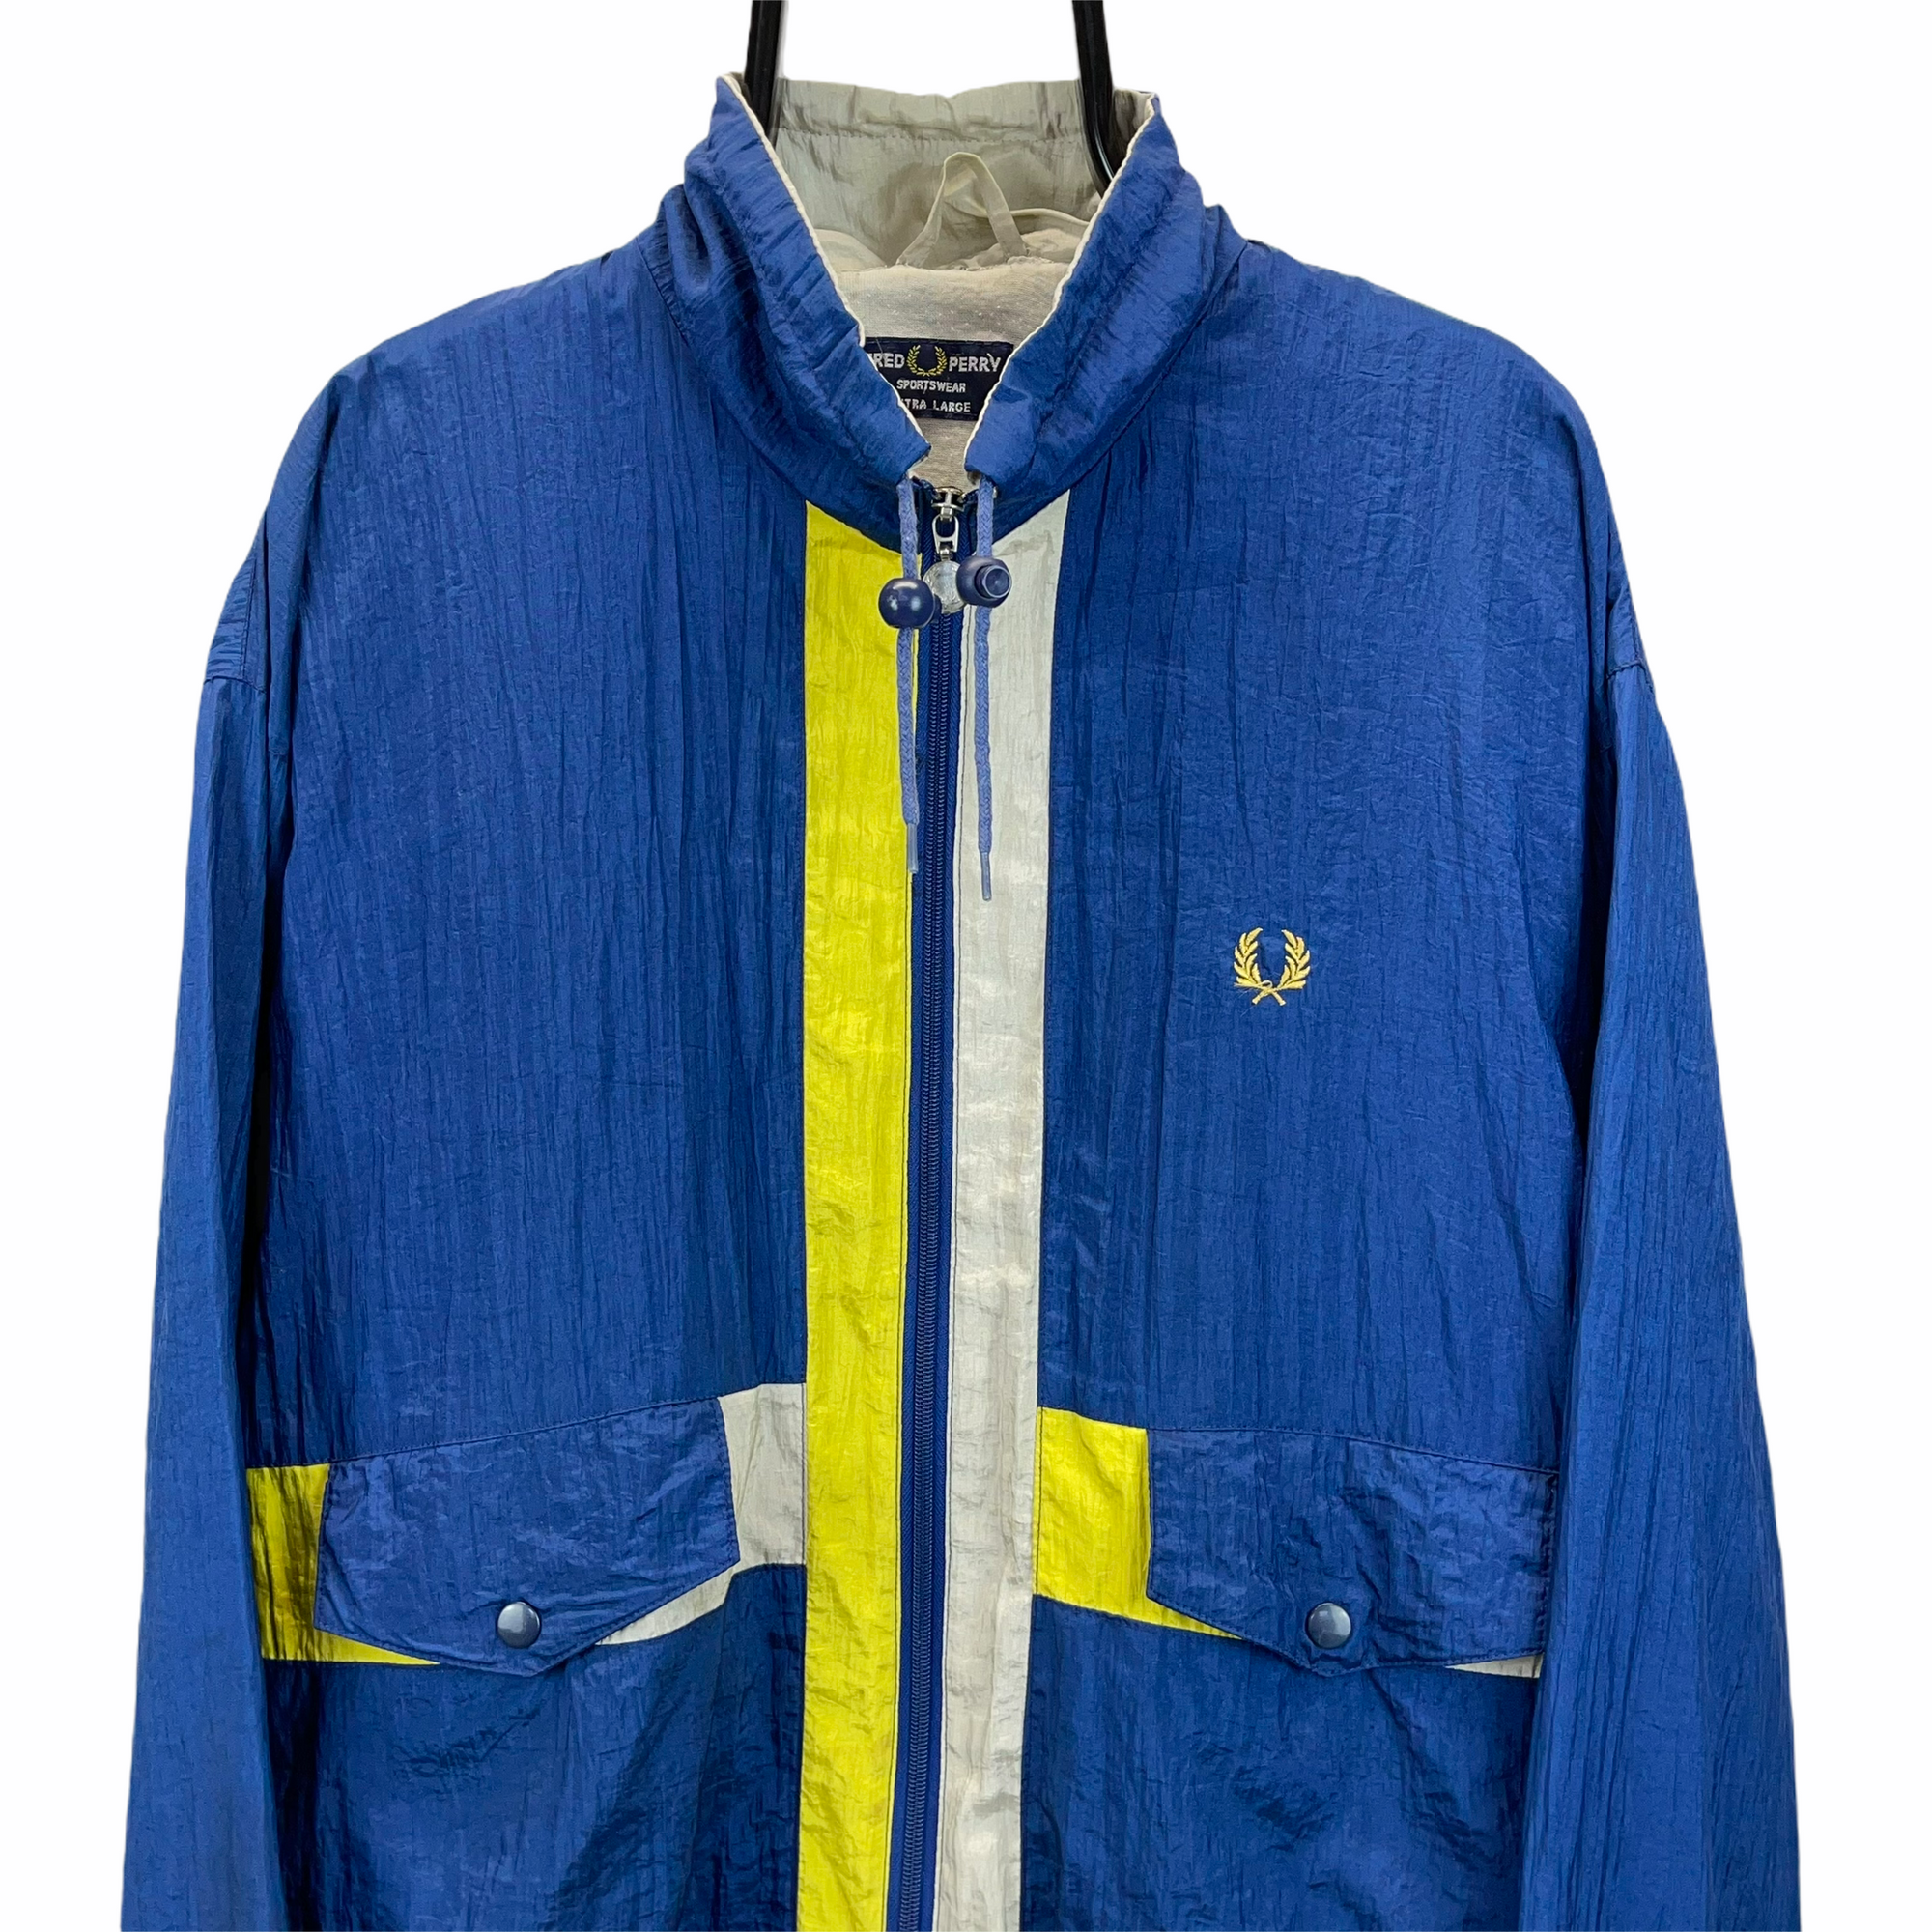 Vintage 90s Fred Perry Track Jacket in Navy & Yellow - Men's XL/Women's XXL